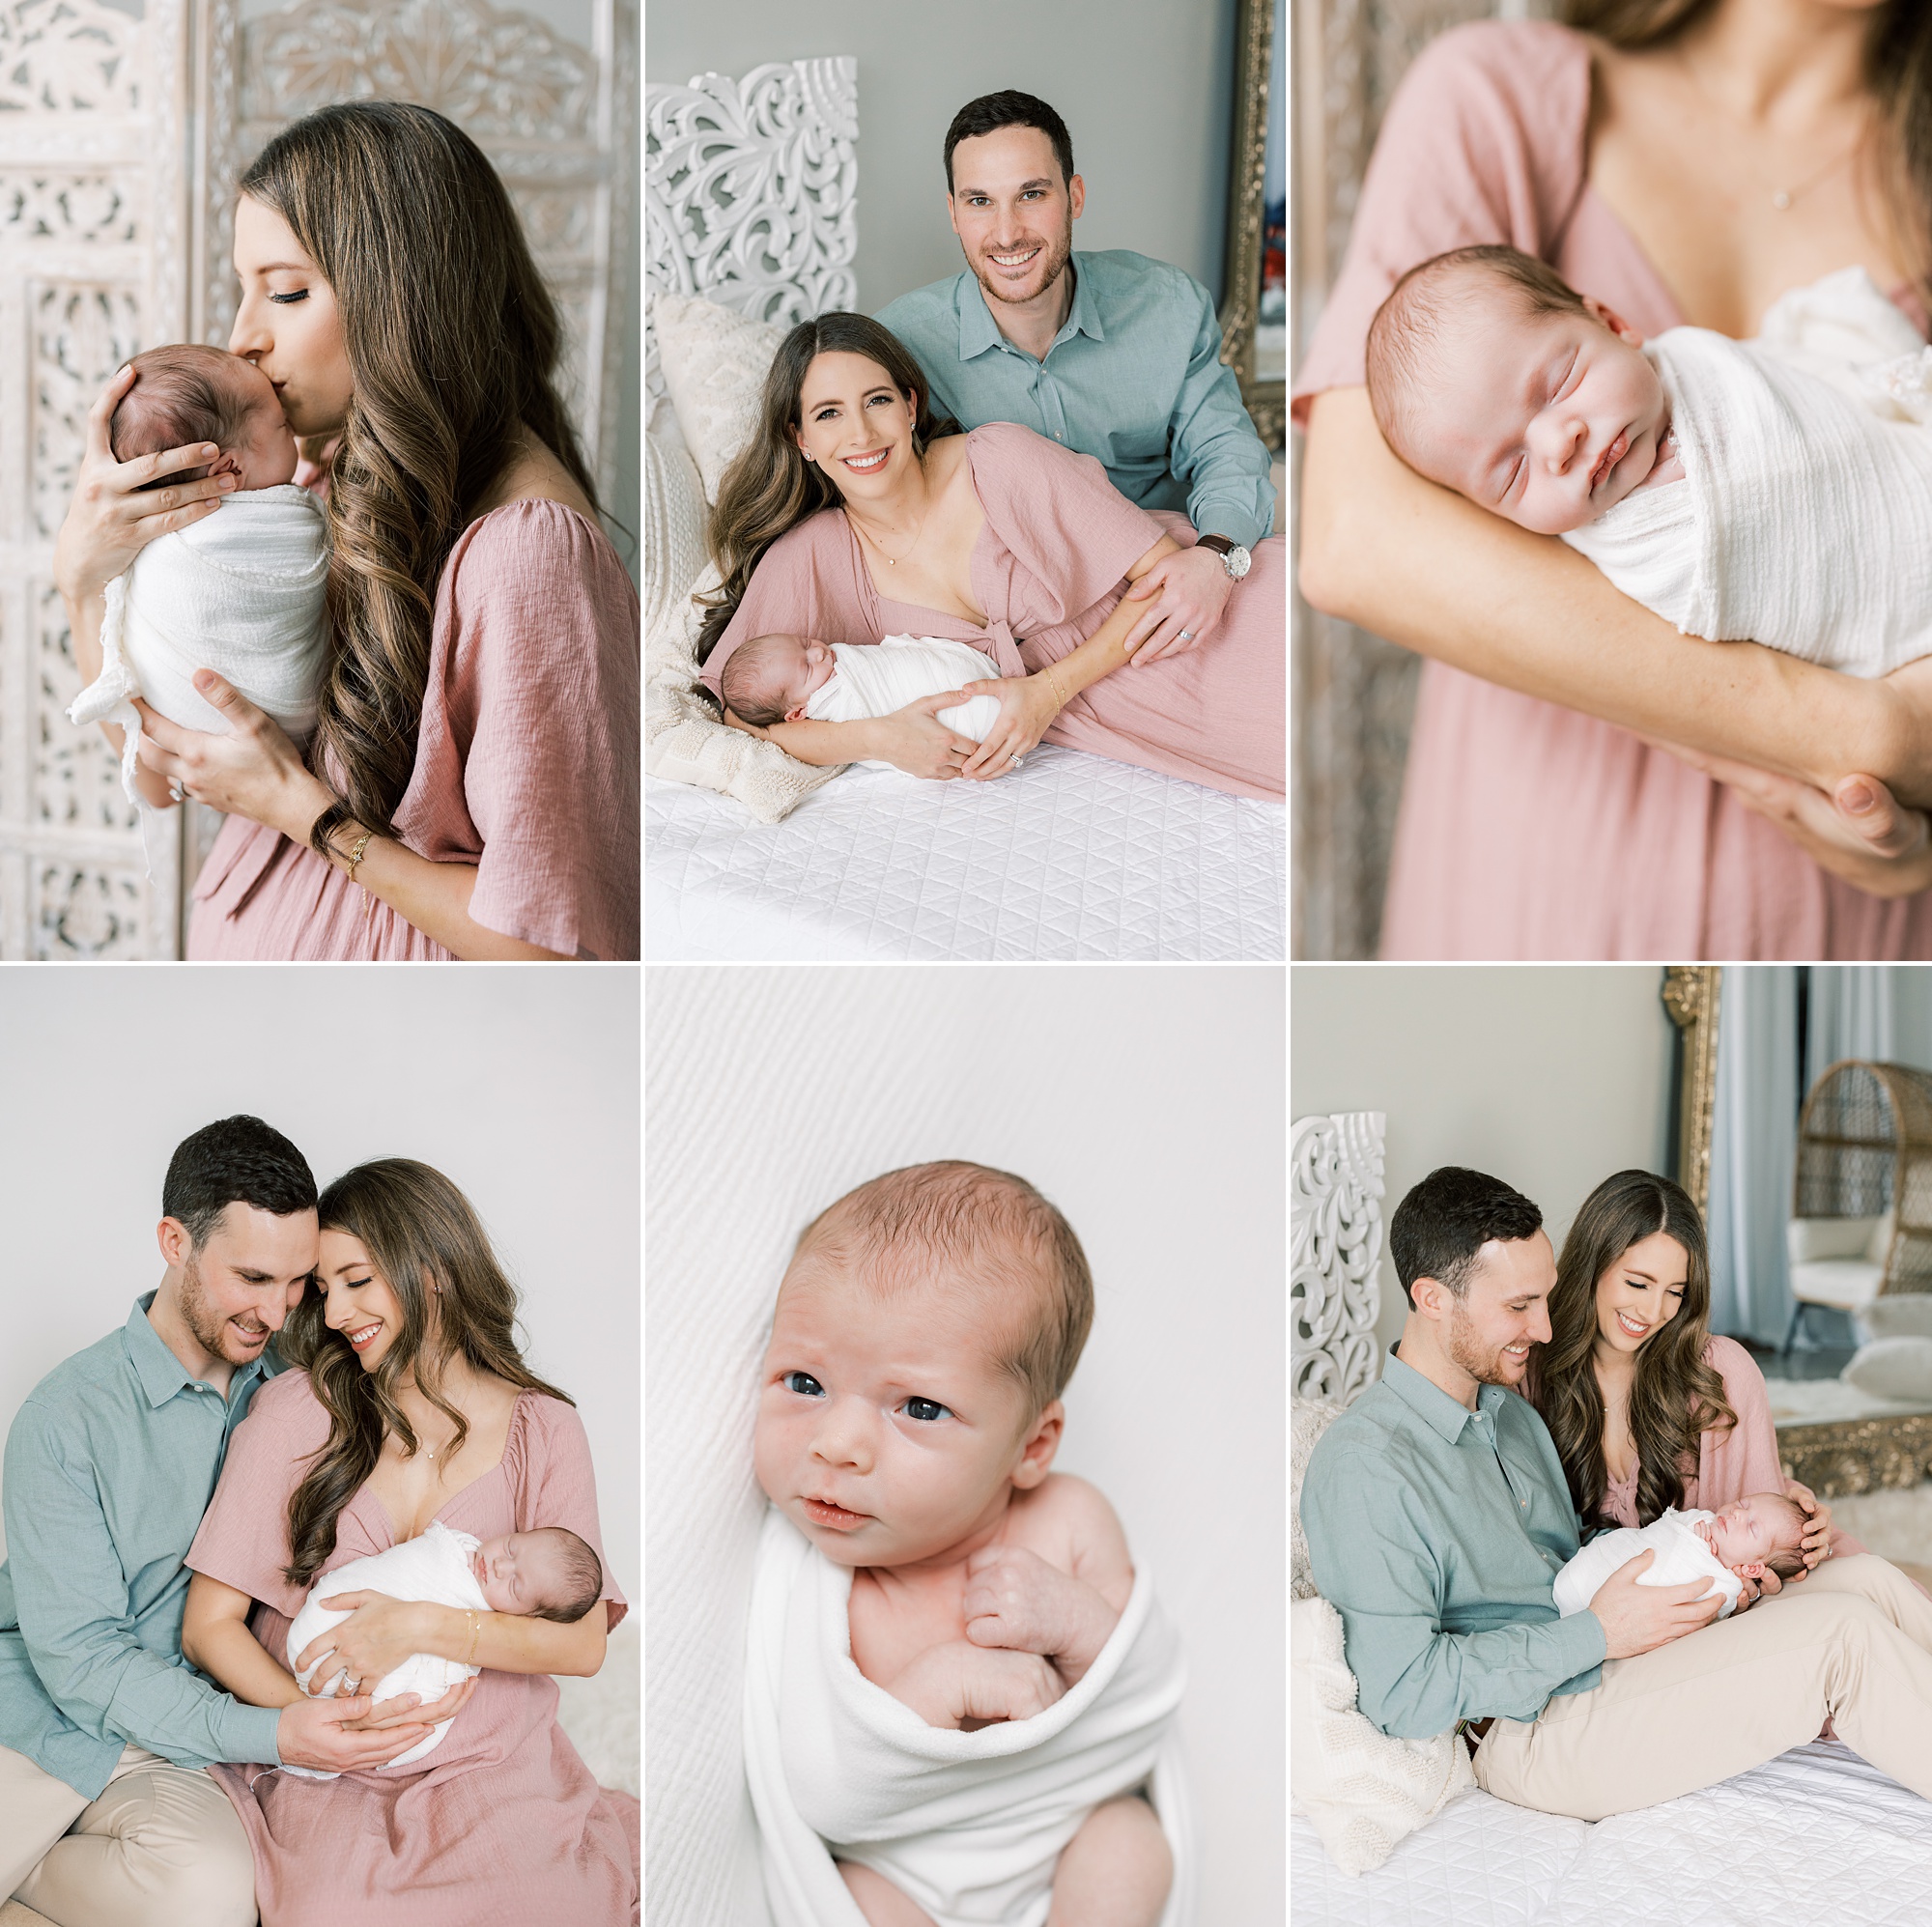 Studio newborn portraits in Philadelphia PA with Samantha Jay Photography for baby girl with pastel color palette